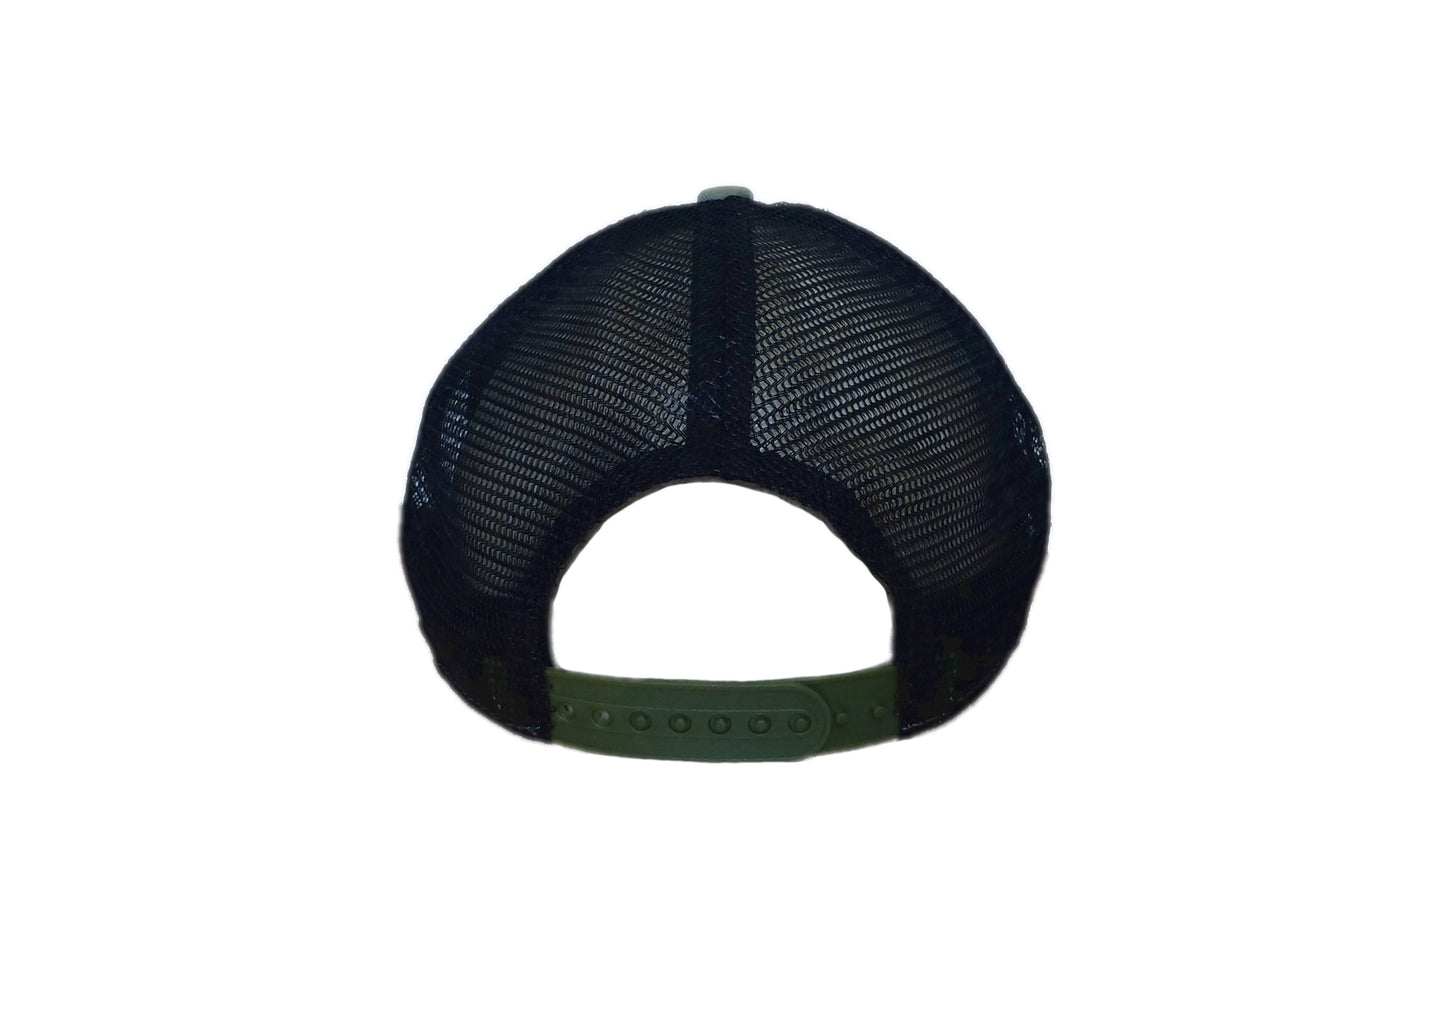 back view of army green and black Angler fisherman logo trucker hat